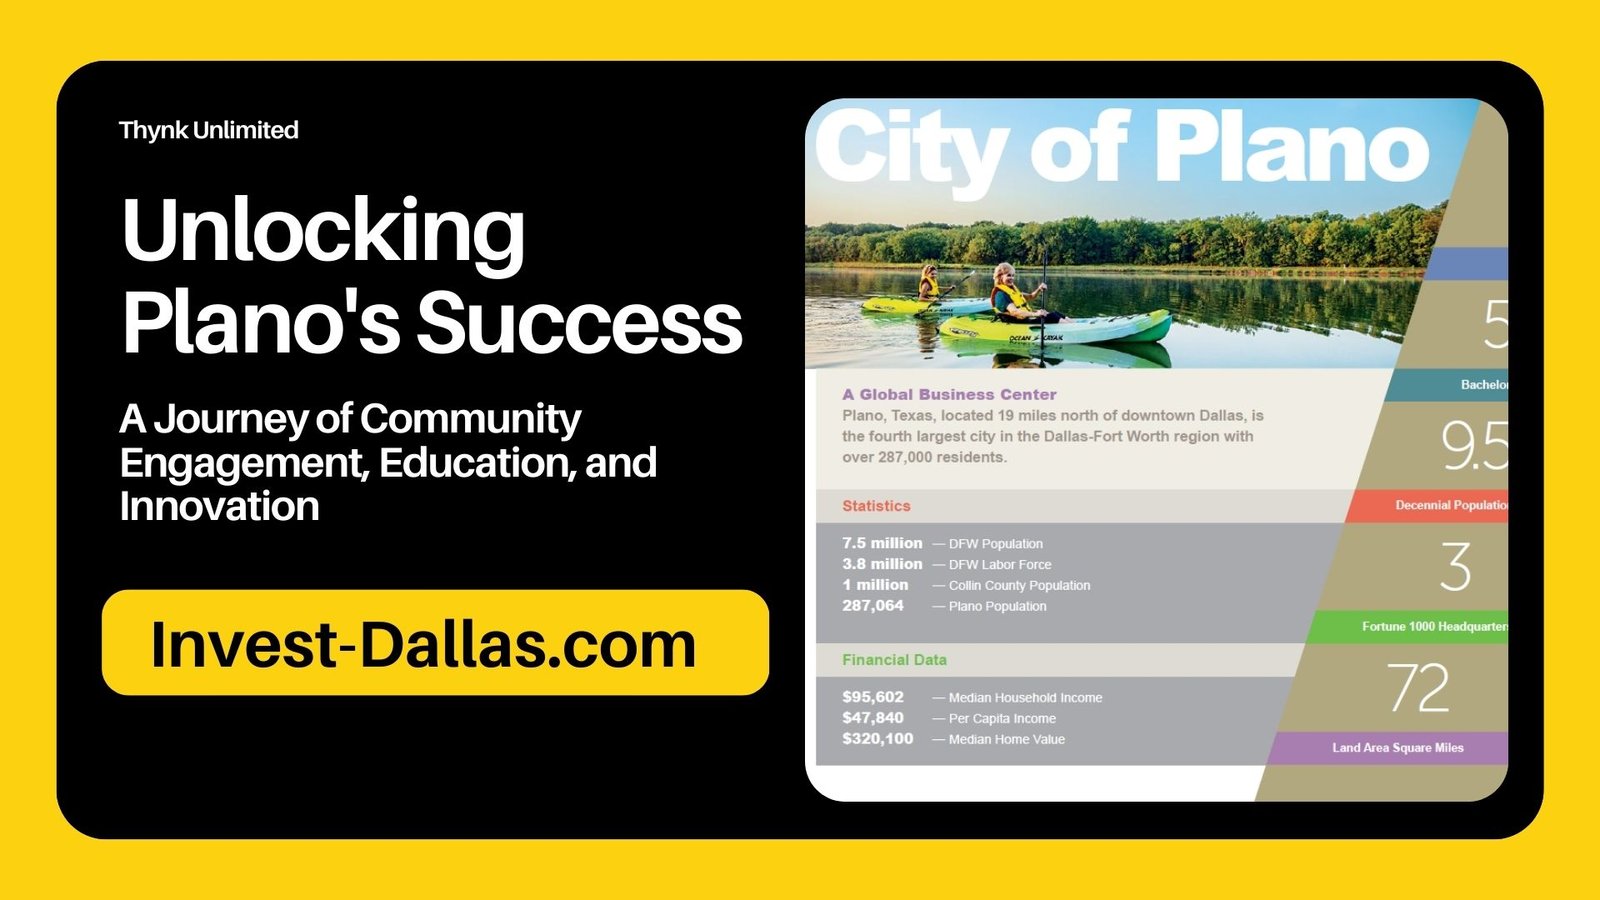 Unlocking Plano's Success: A Journey of Community Engagement, Education, and Innovation